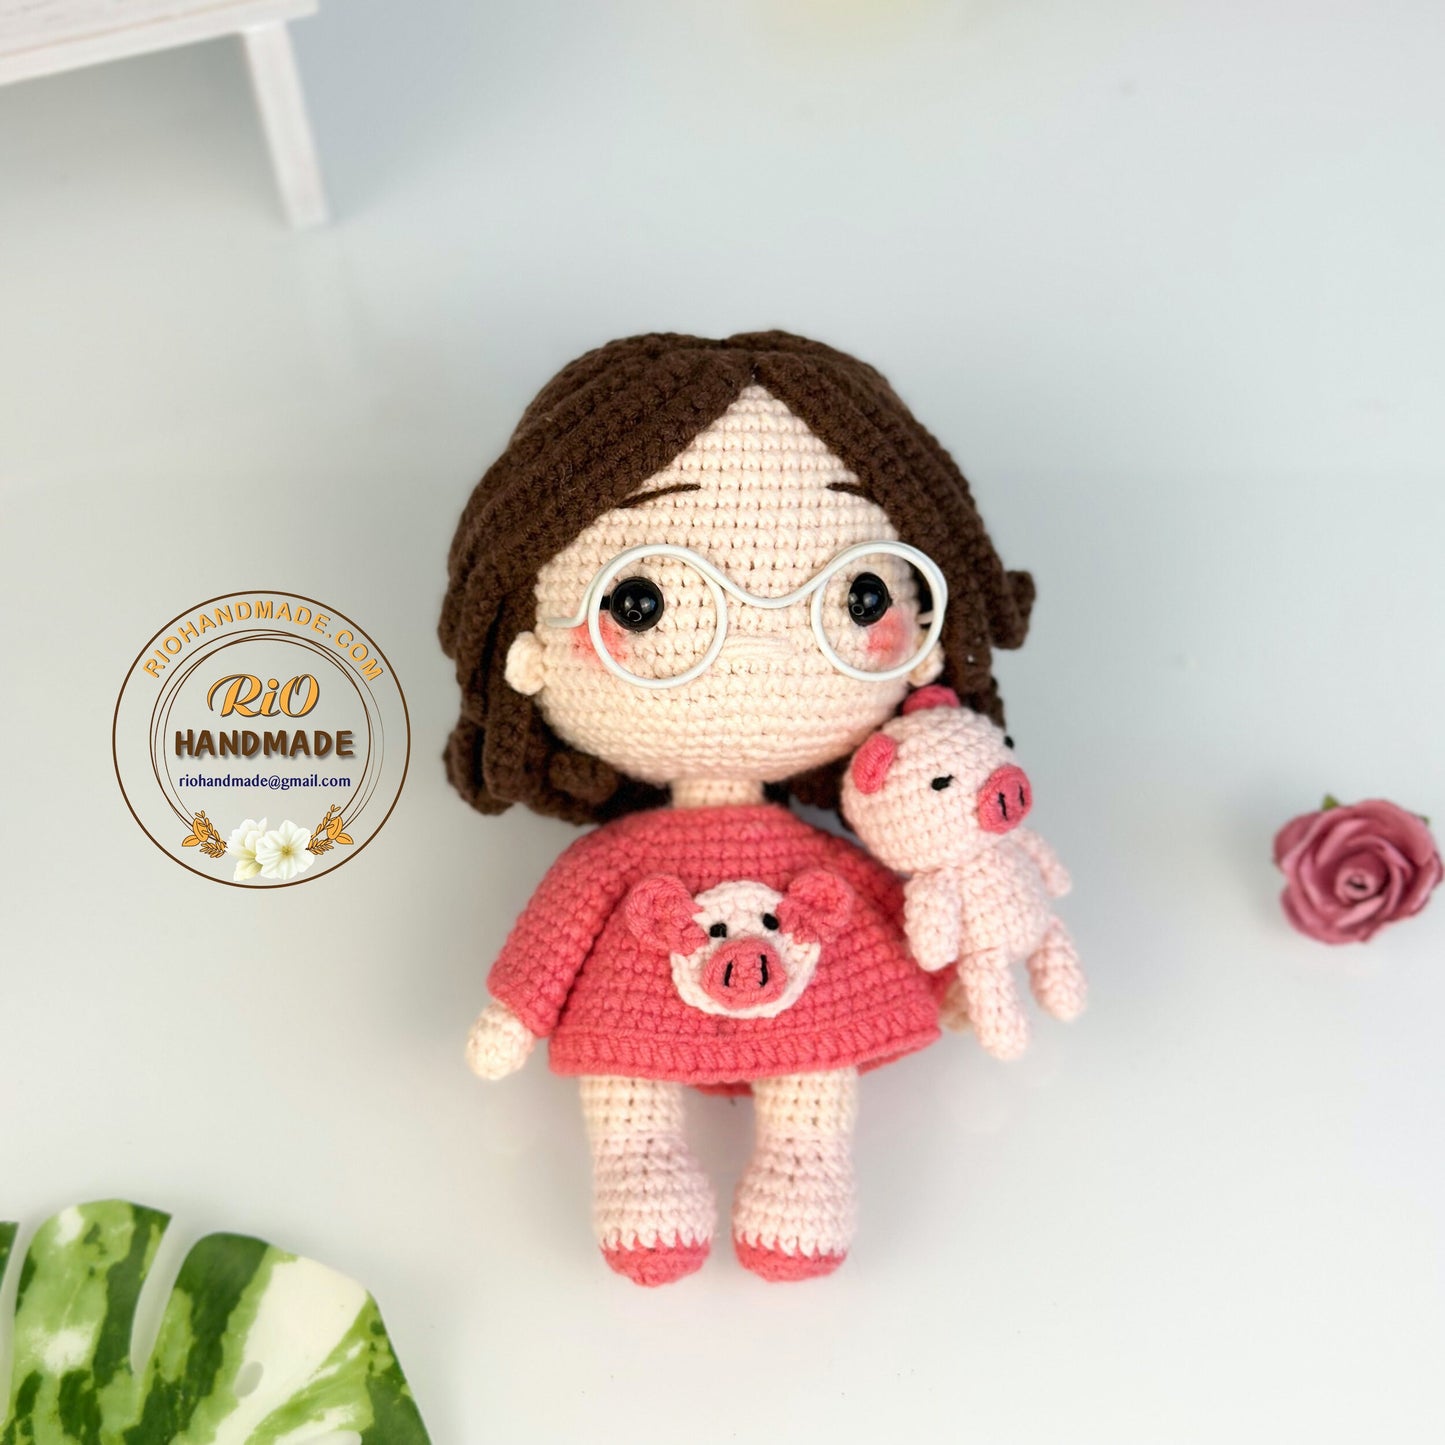 Handmade yarn cotton piggy doll crochet, amigurumi piggy doll with toy, cute gift, soft toy for toddler, kid, adult hobby